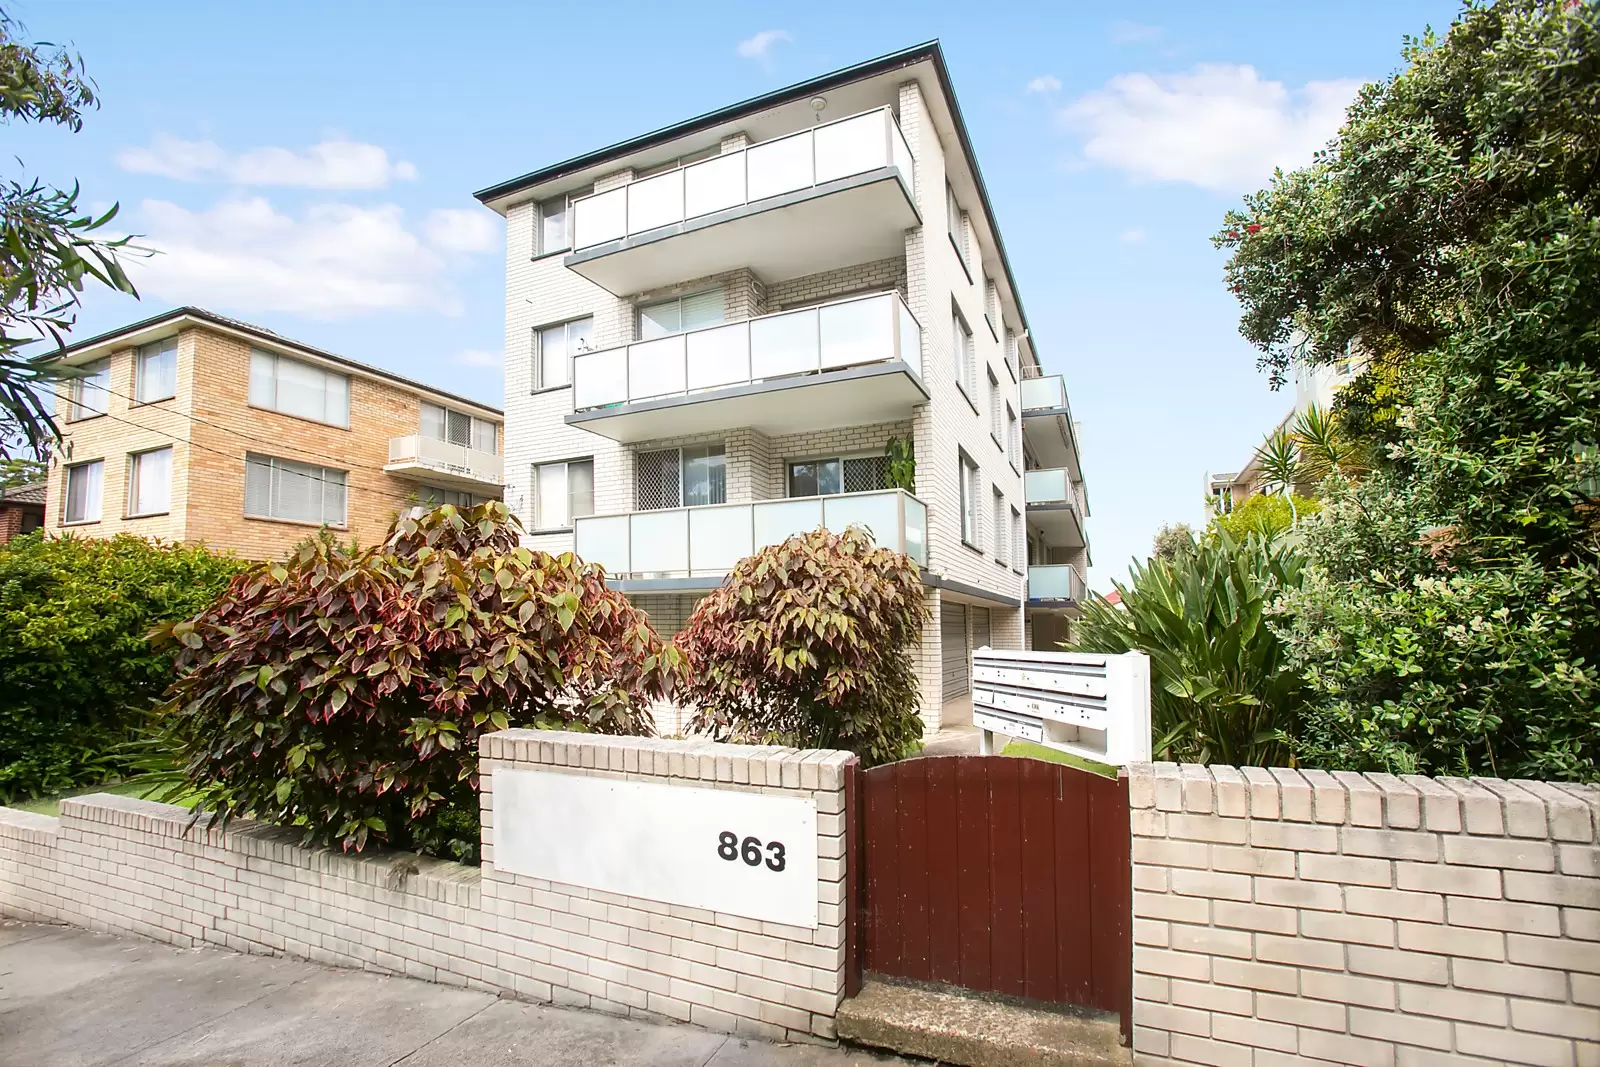 Photo #7: 6/863 Anzac Parade, Maroubra - Sold by Sydney Sotheby's International Realty